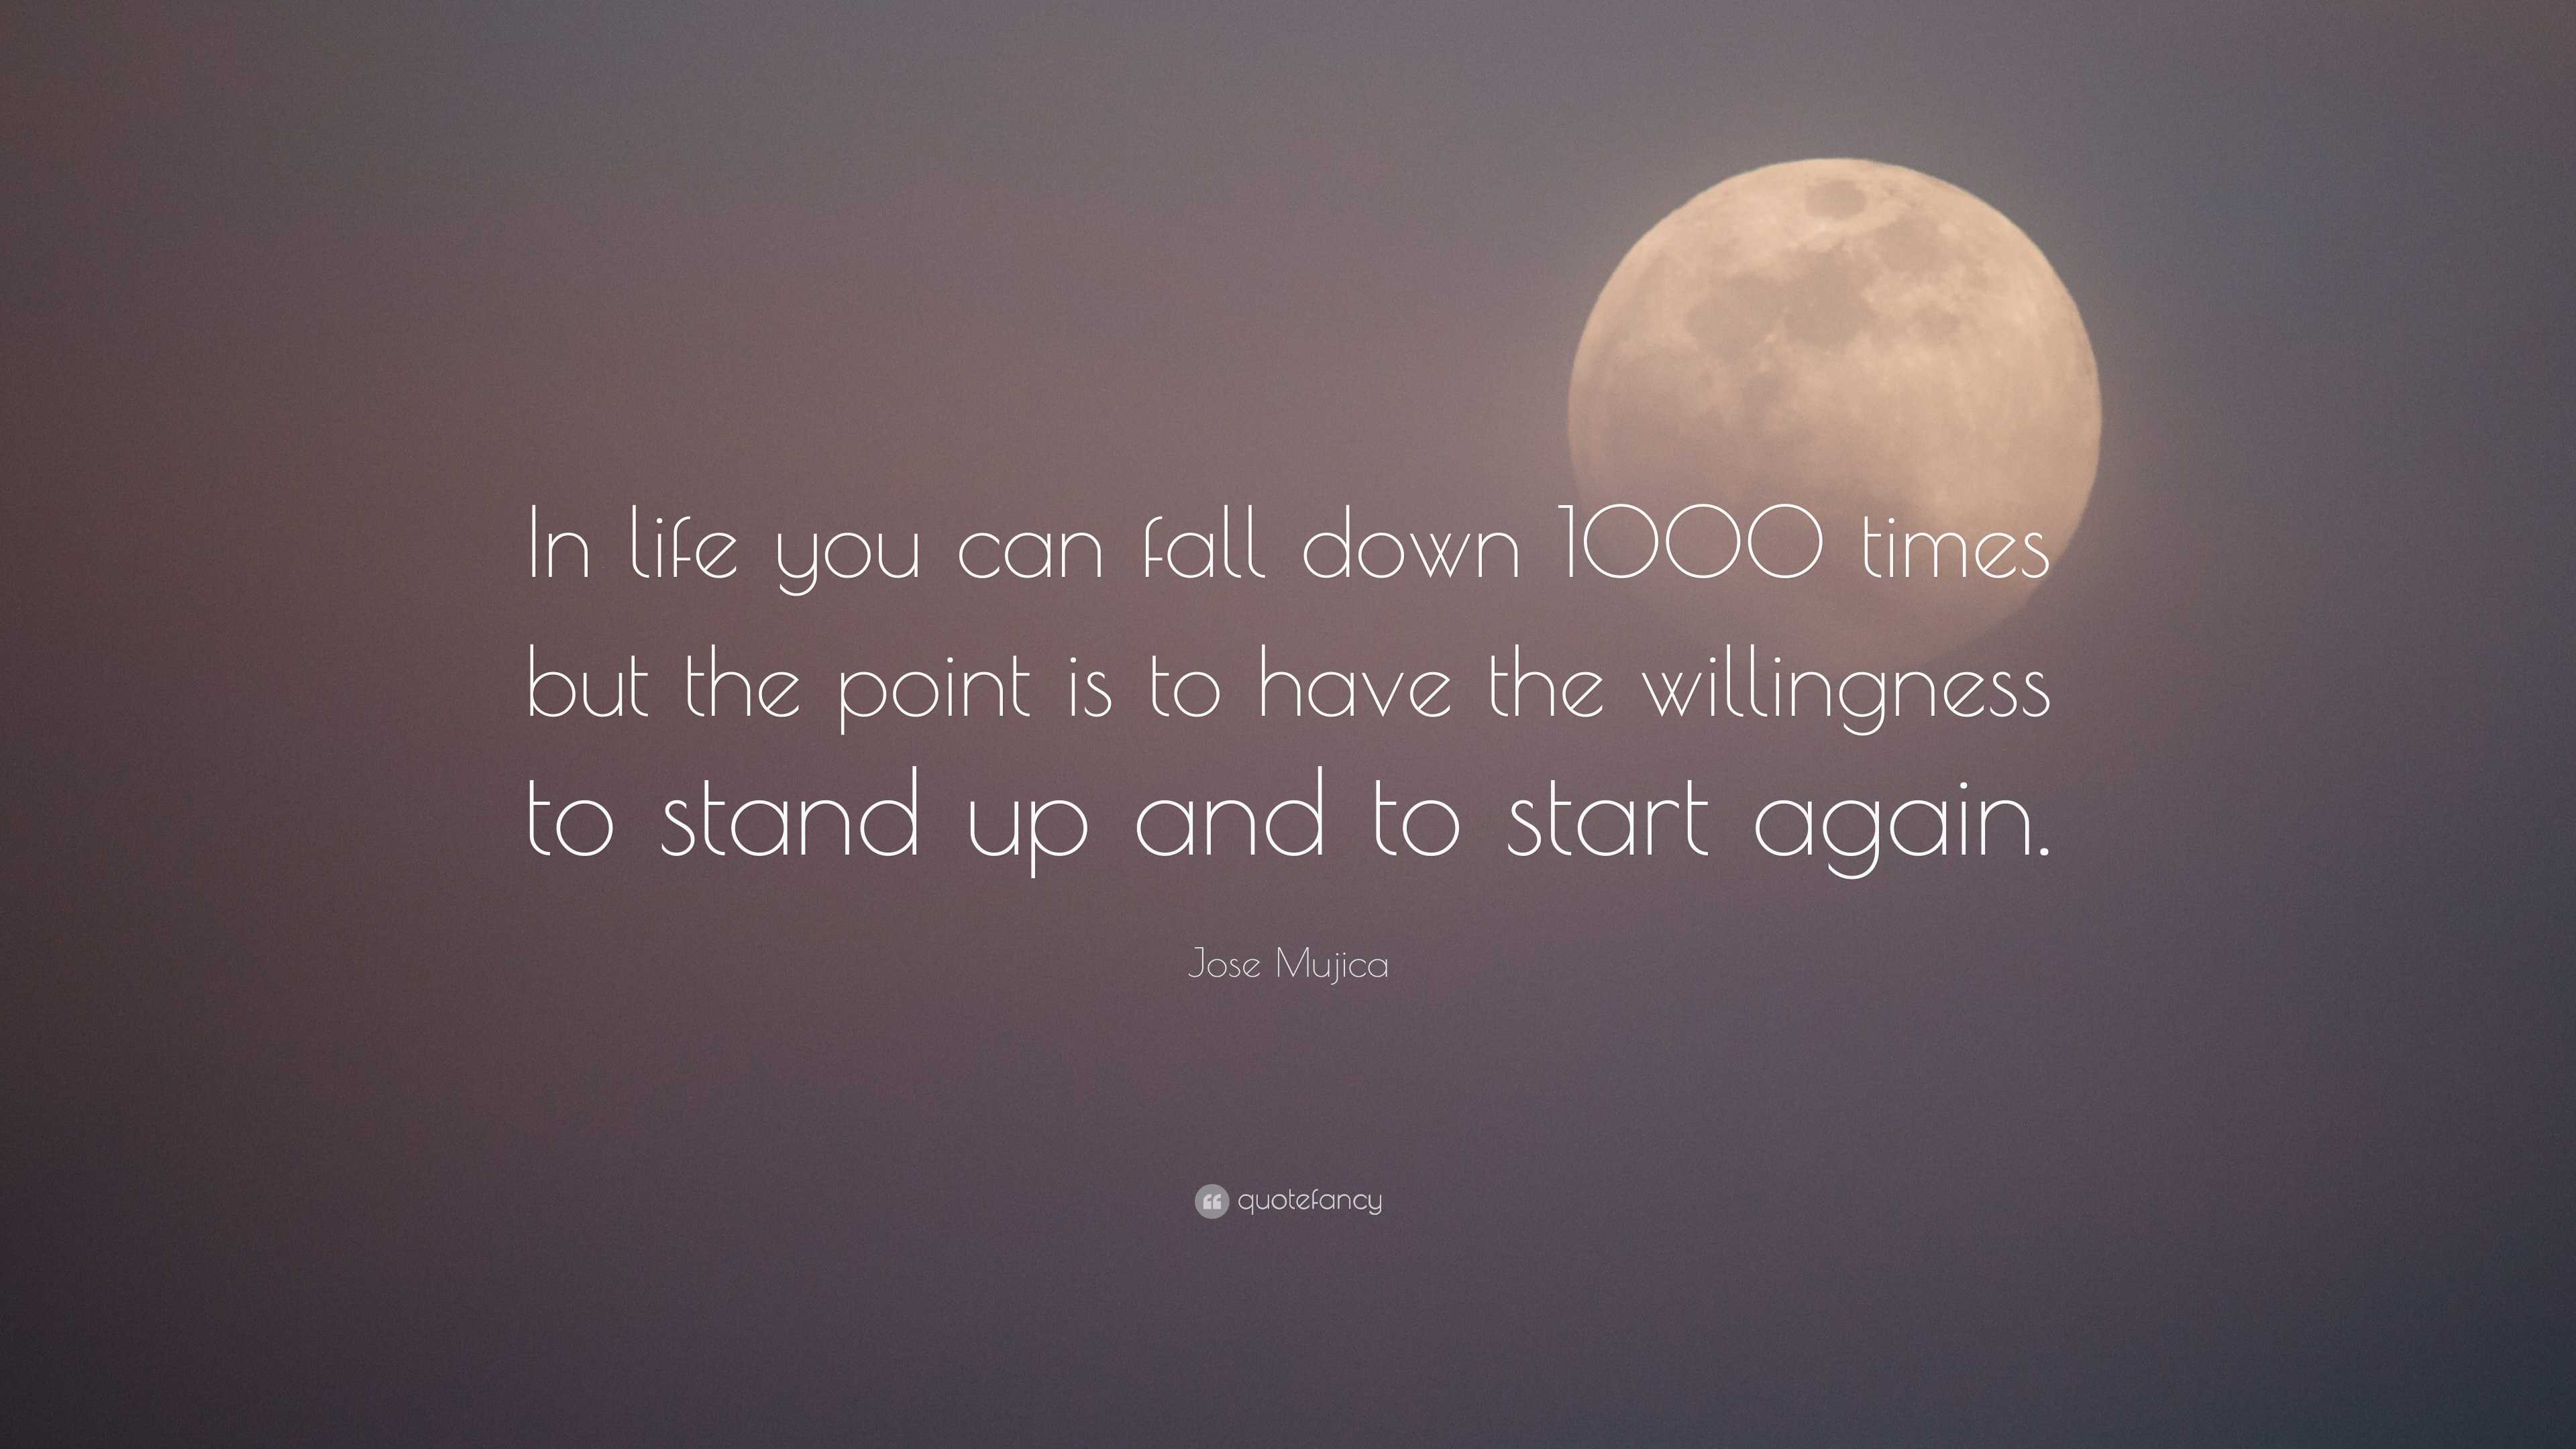 Jose Mujica Quote: “In life you can fall down 1000 times but the